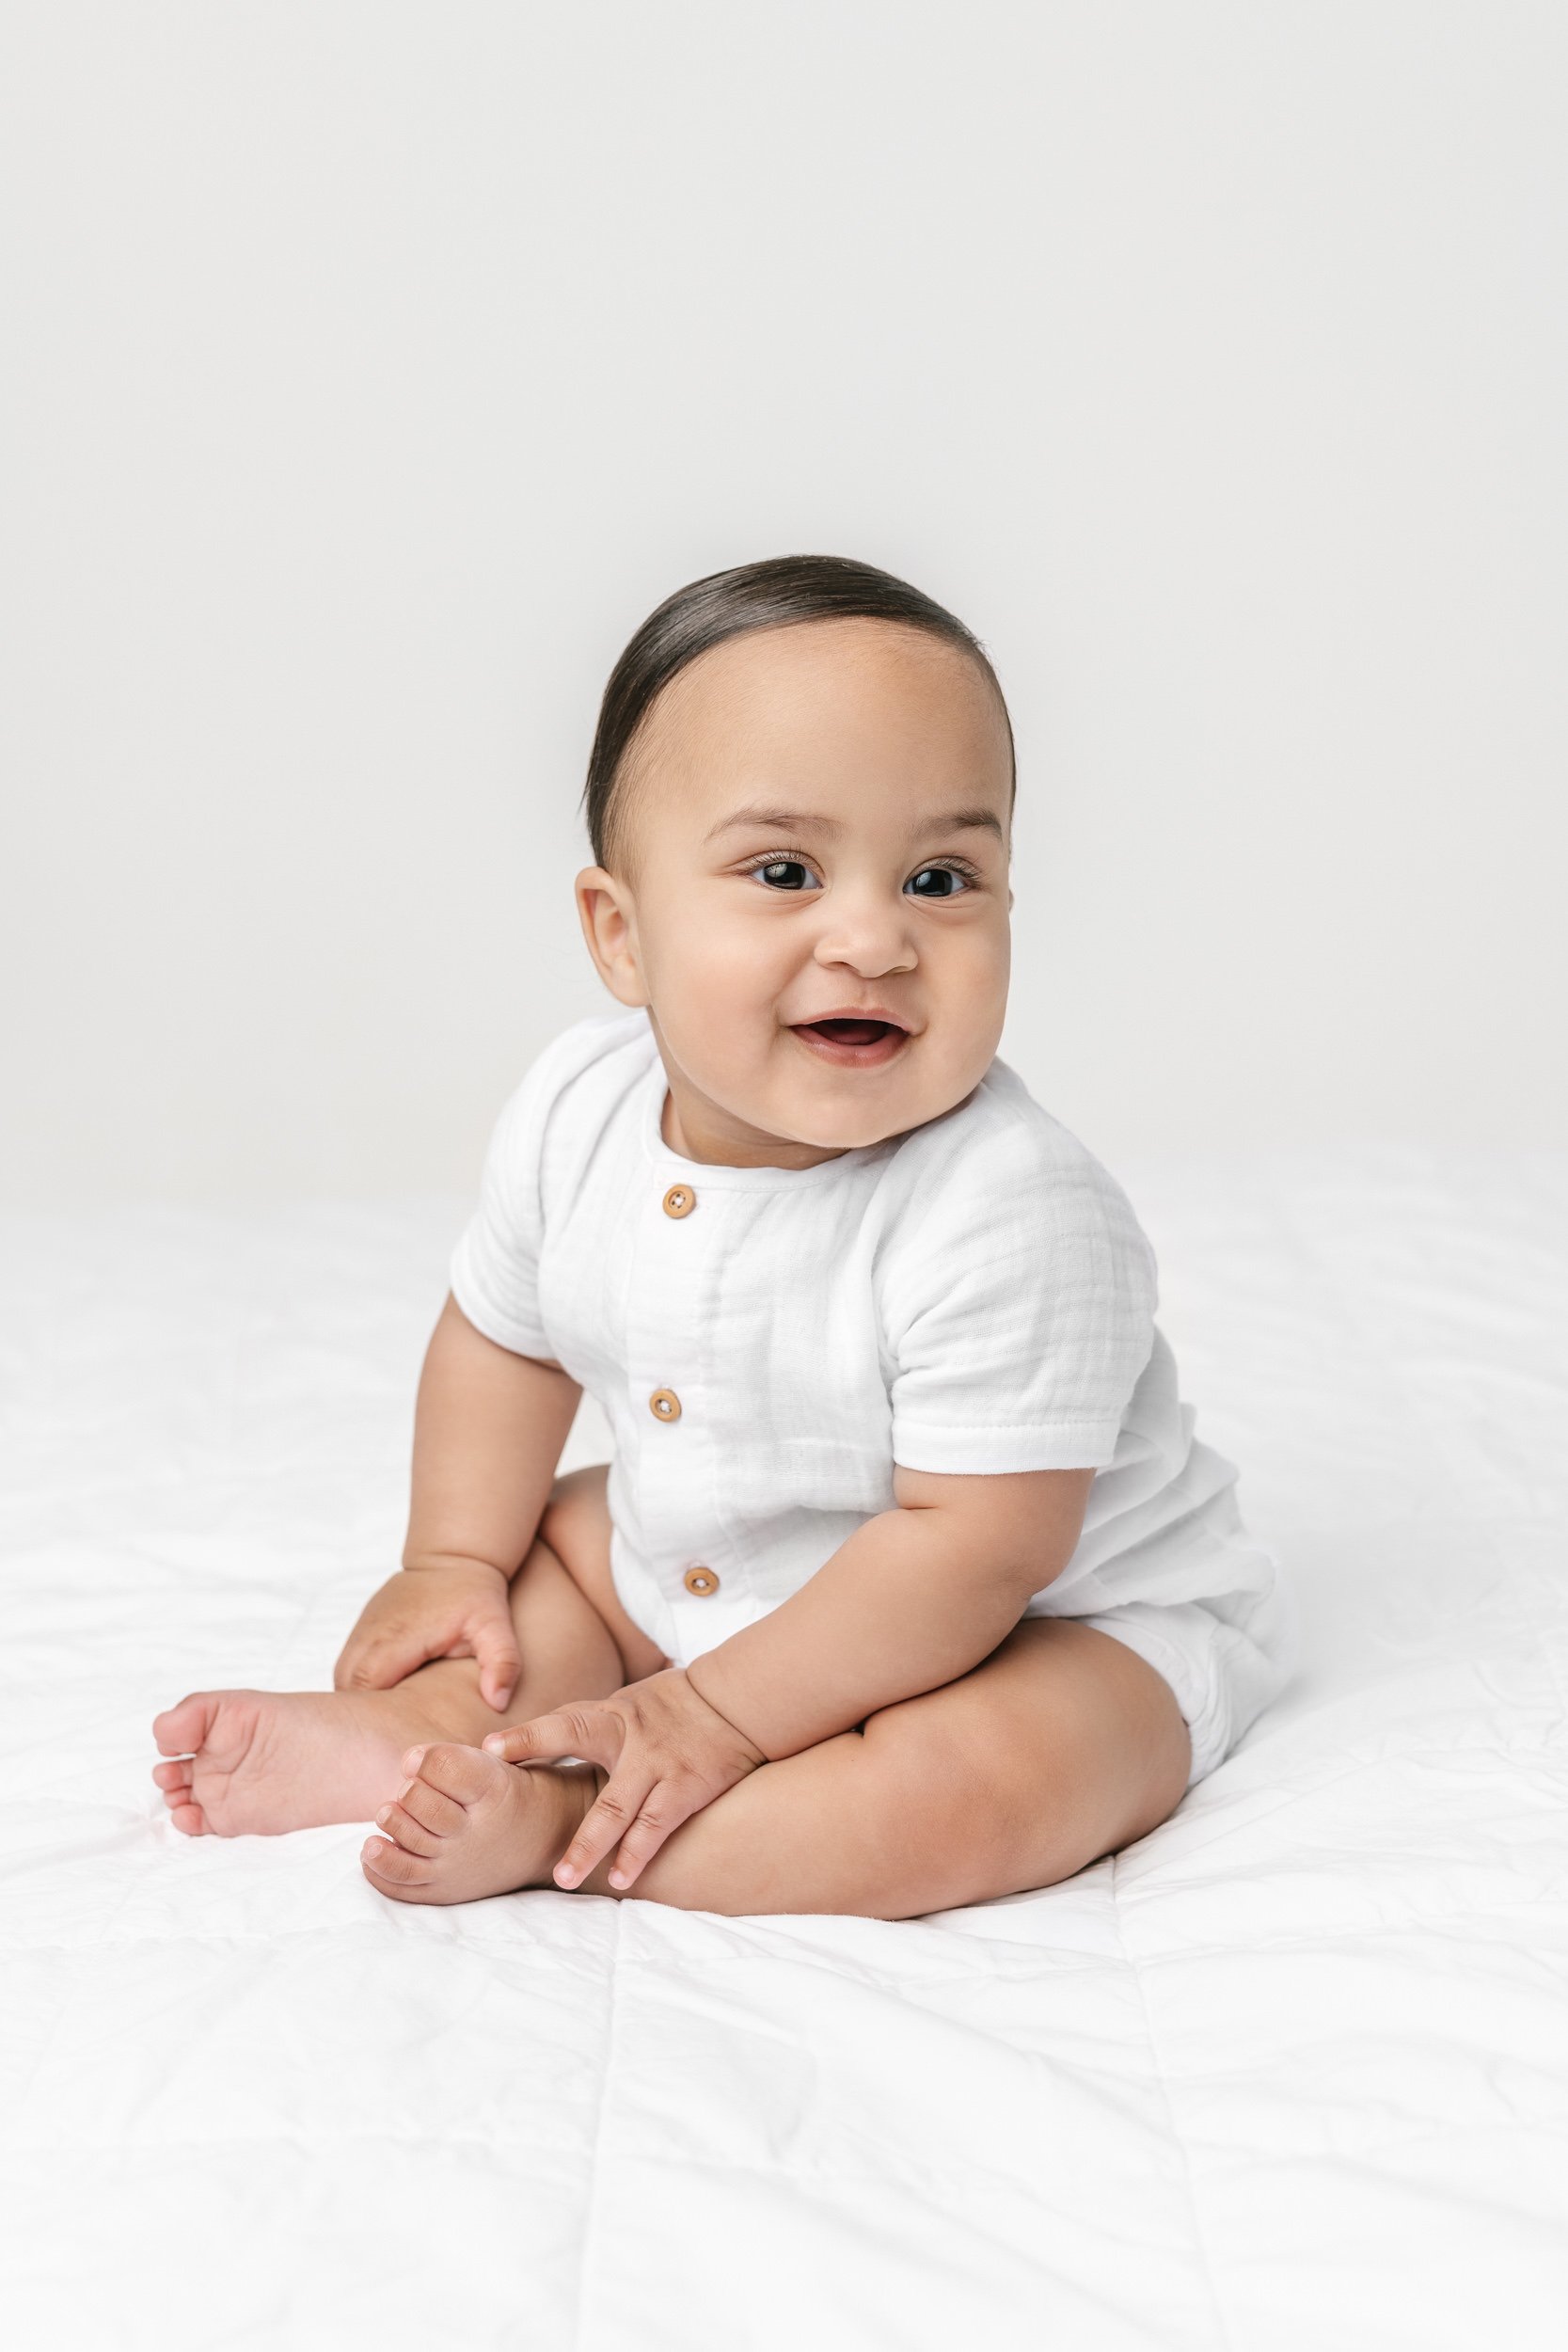  A one-year-old baby boy sits and smiles in a white romper captured by Nicole Hawkins Photography. white baby romper portraits NJ studio family #NicoleHawkinsPhotography #NicoleHawkinsNewborns #NewJerseyNewborns #NewJerseyStudioNewborns #StudioNewbor